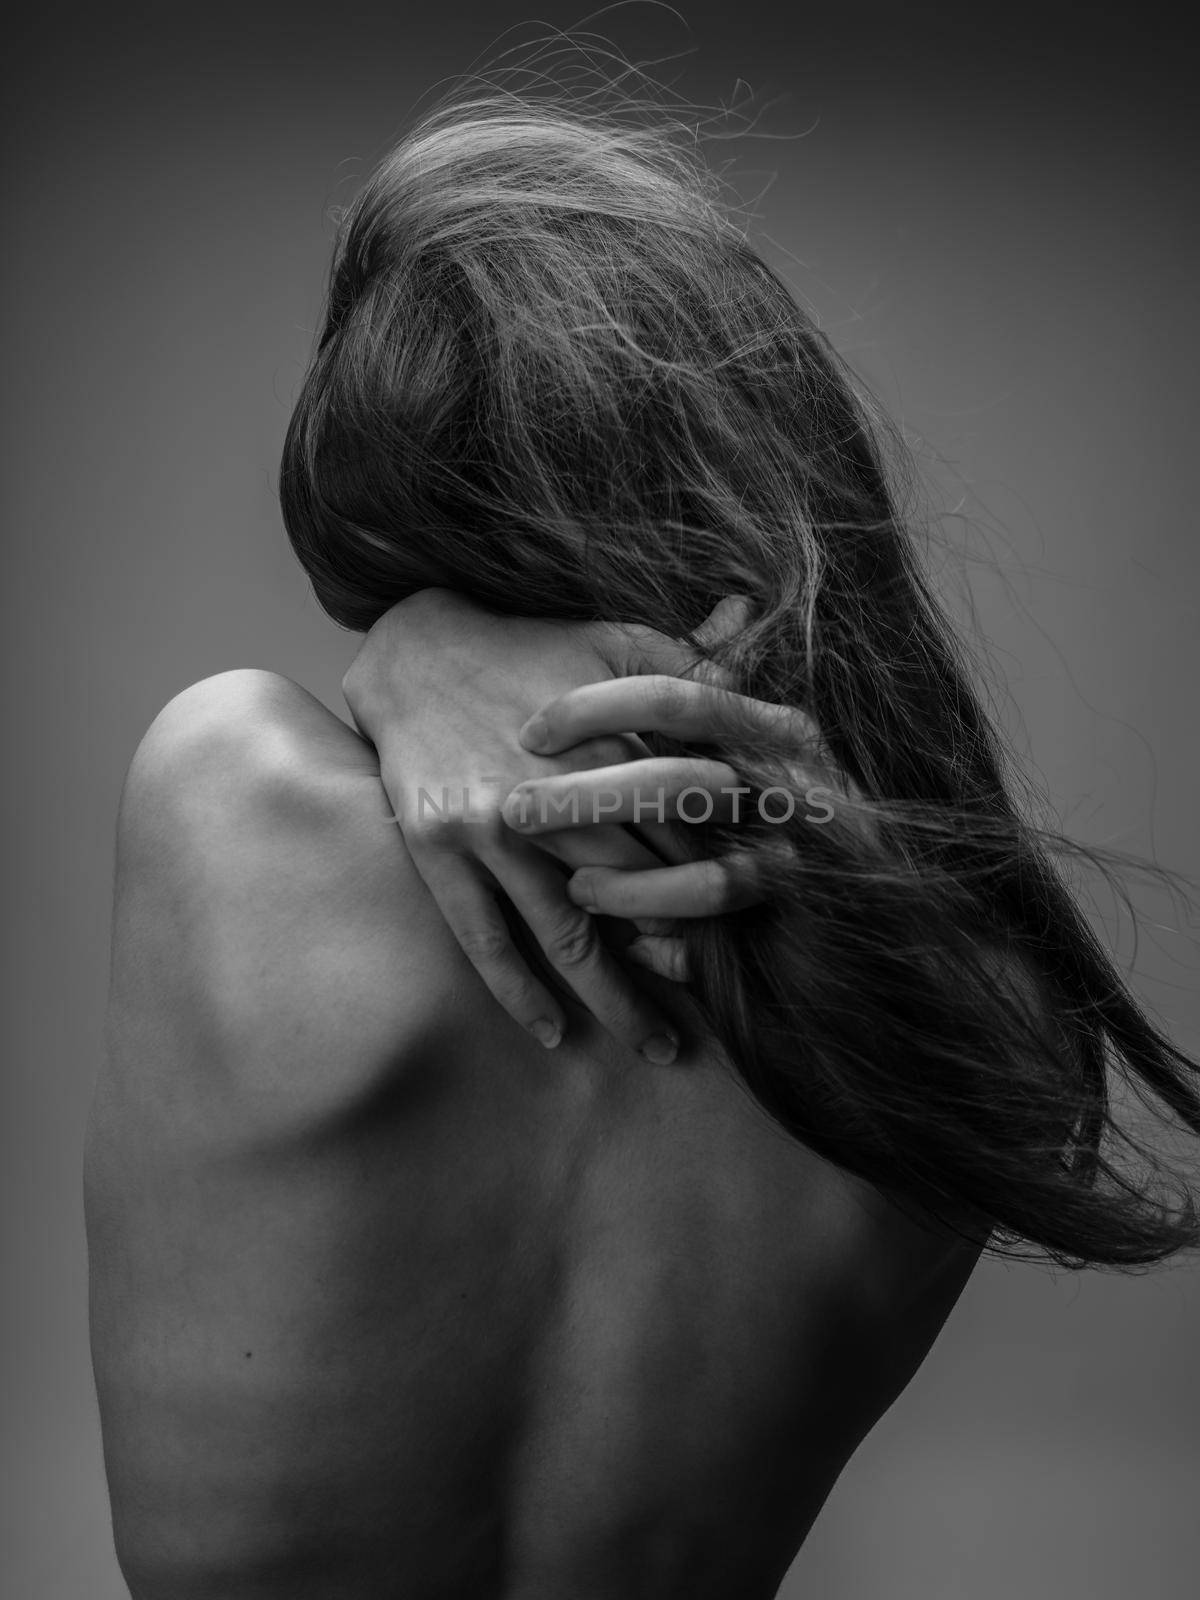 The woman in the gray photograph is touching herself with her bare back by SHOTPRIME